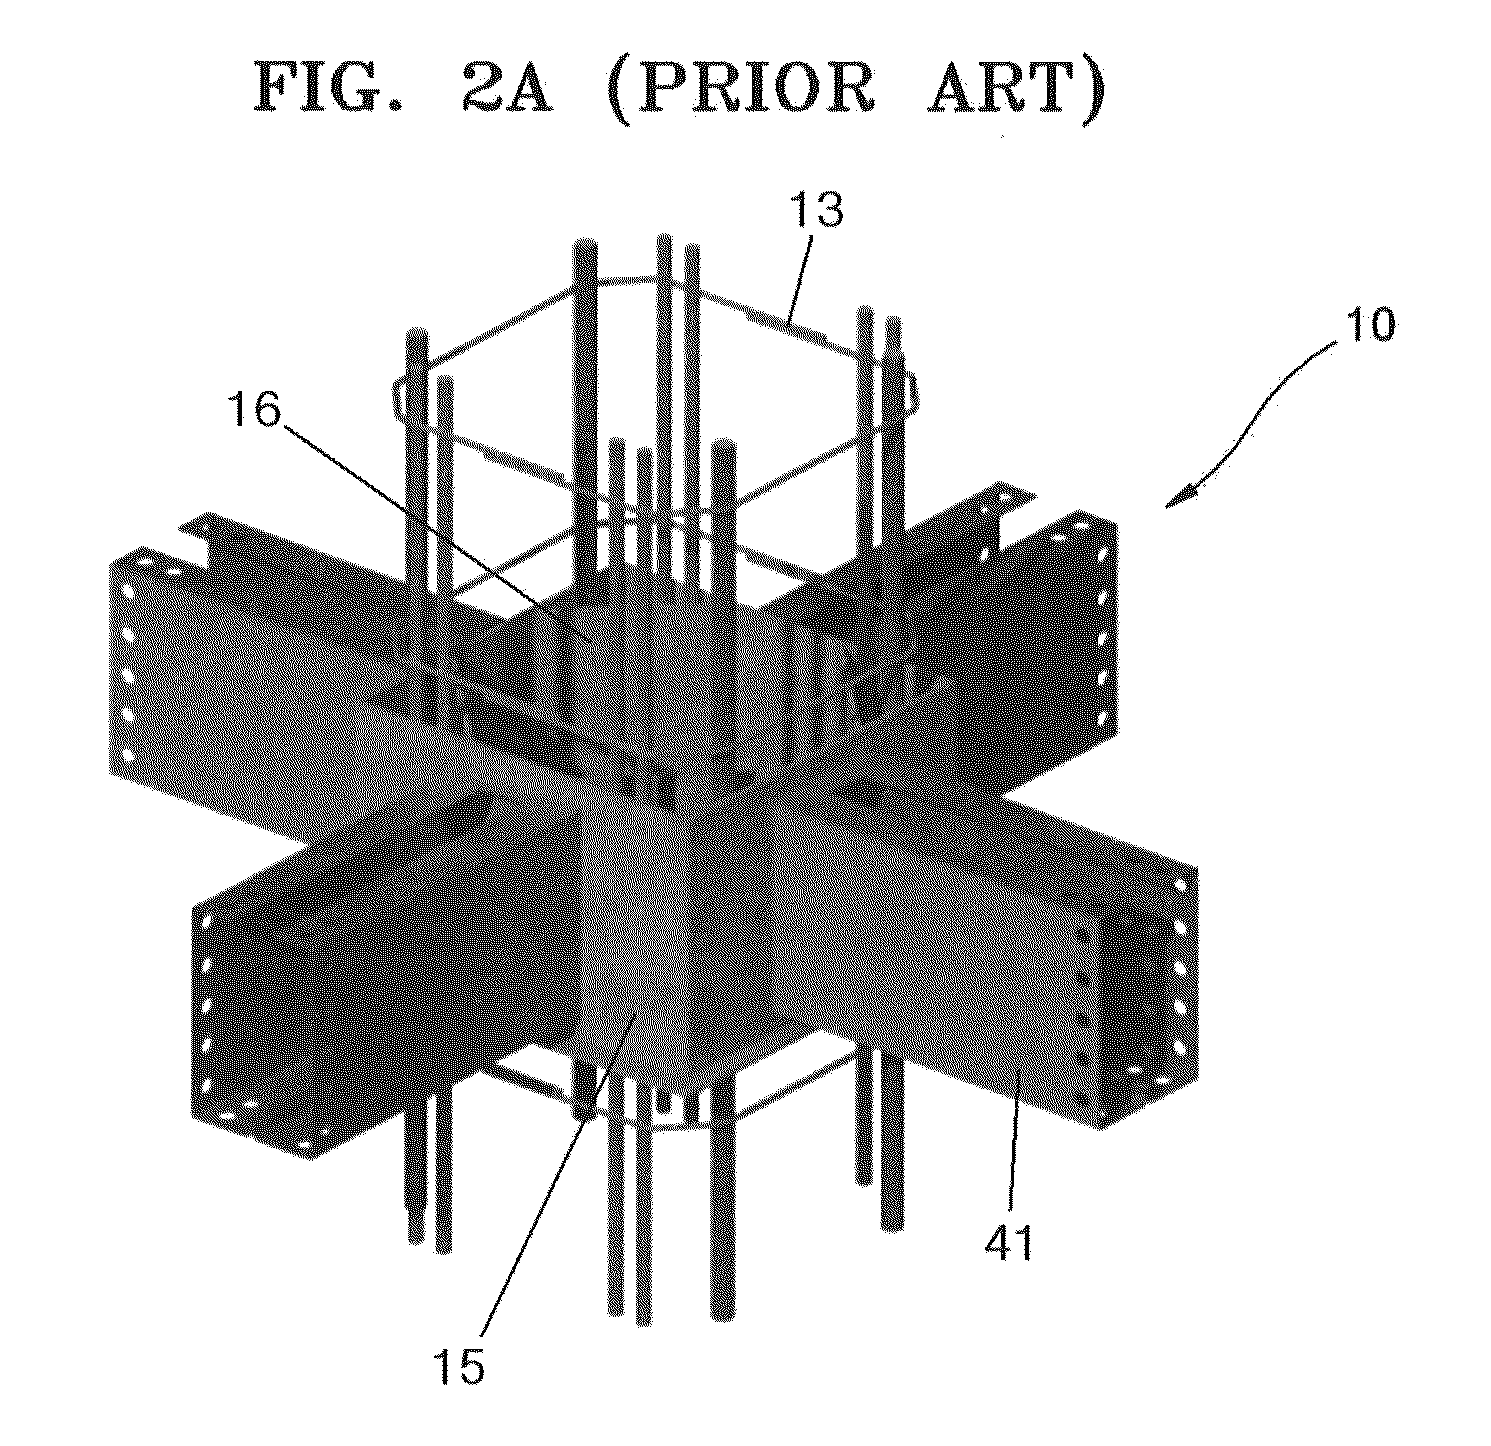 Method of constructing prefabricated steel reinforced concrete (PSRC) column using angle steels and psrc column using angle steels